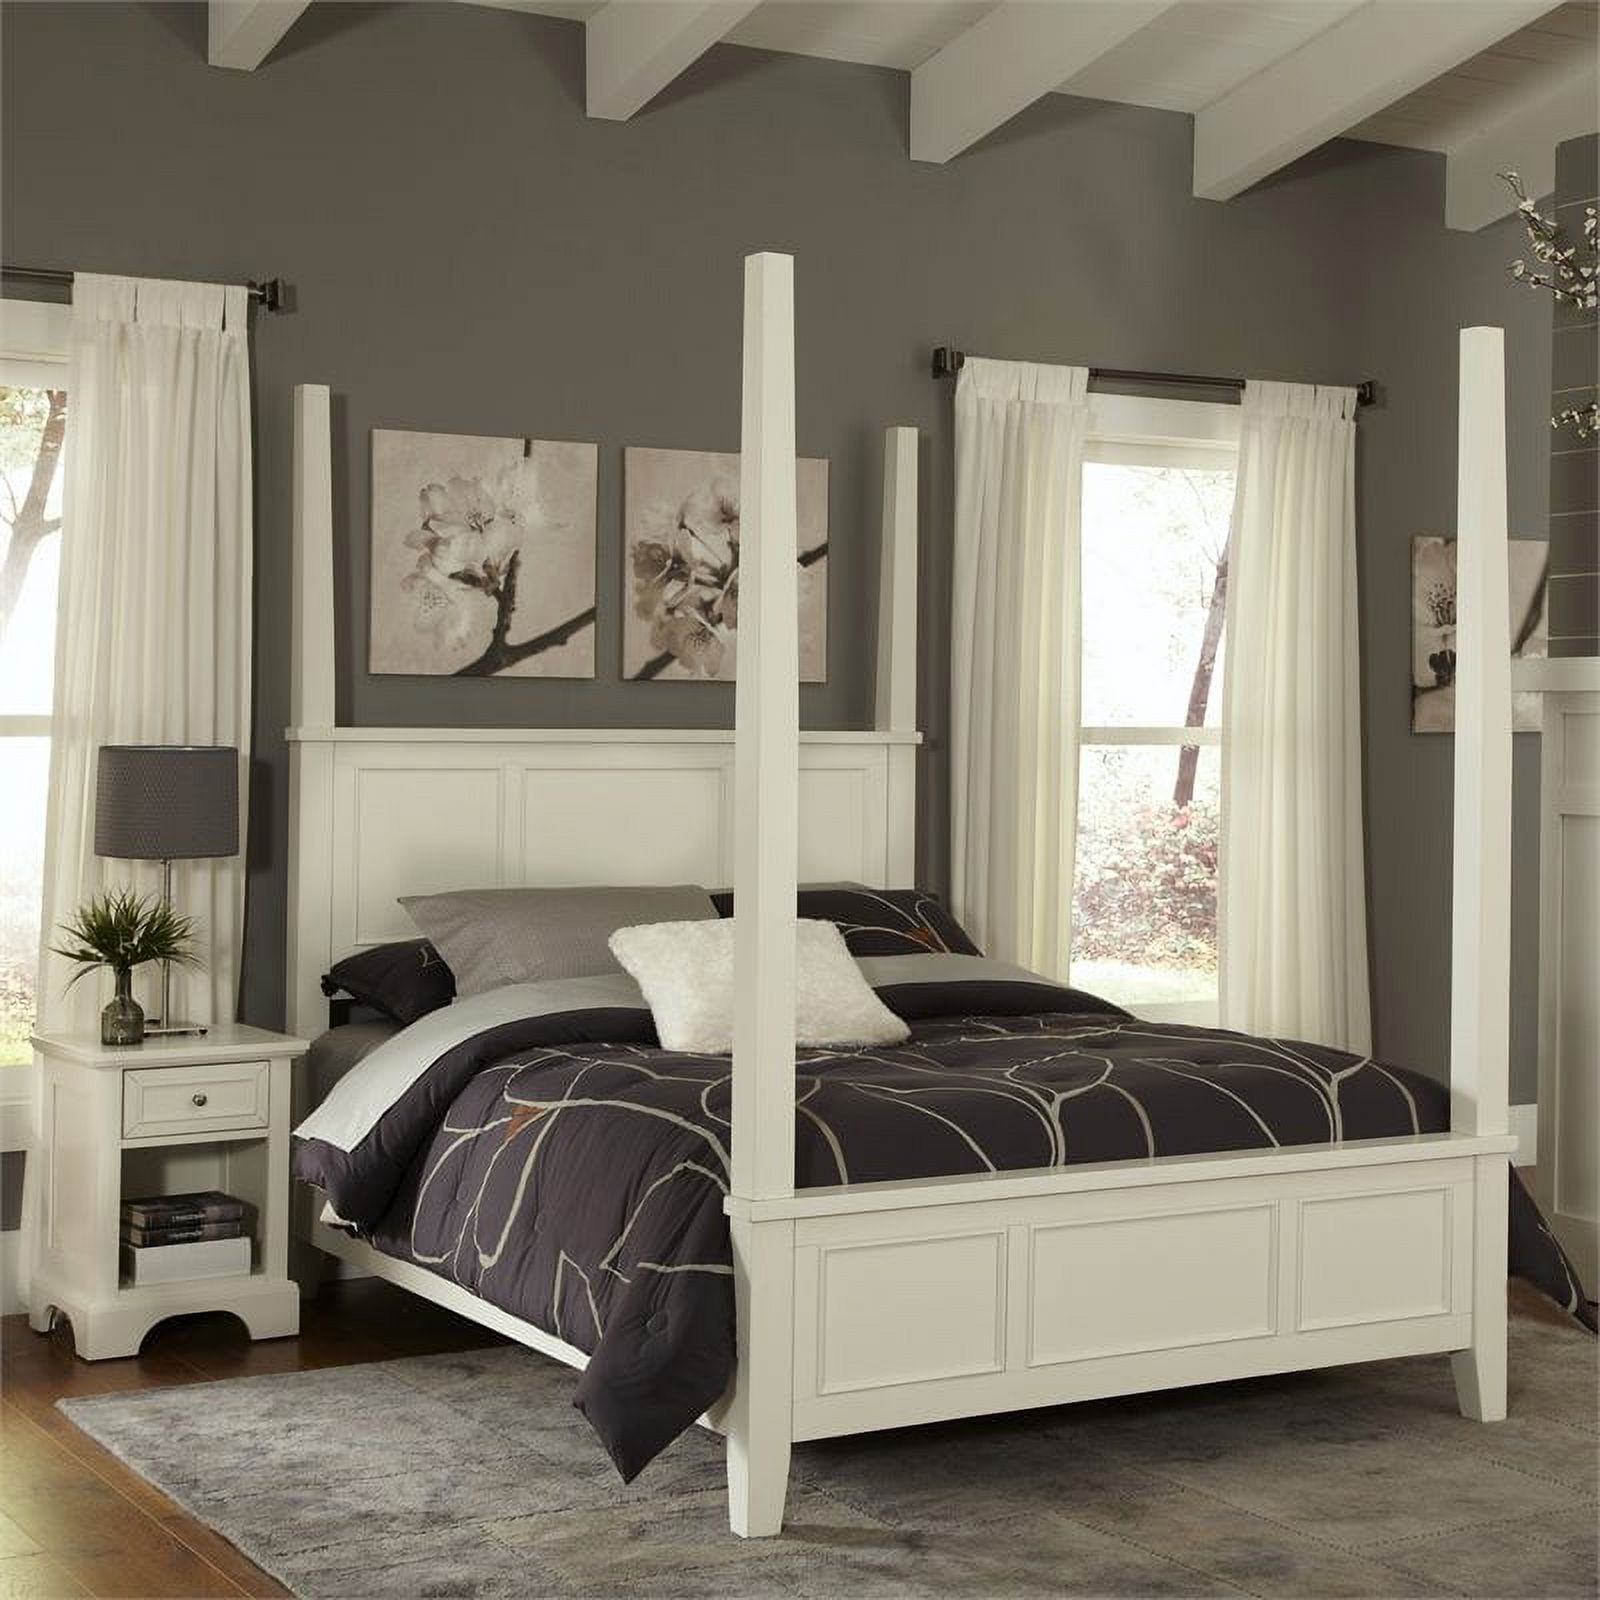 Pemberly Row Contemporary Queen Wooden Poster Bed in White - image 2 of 2